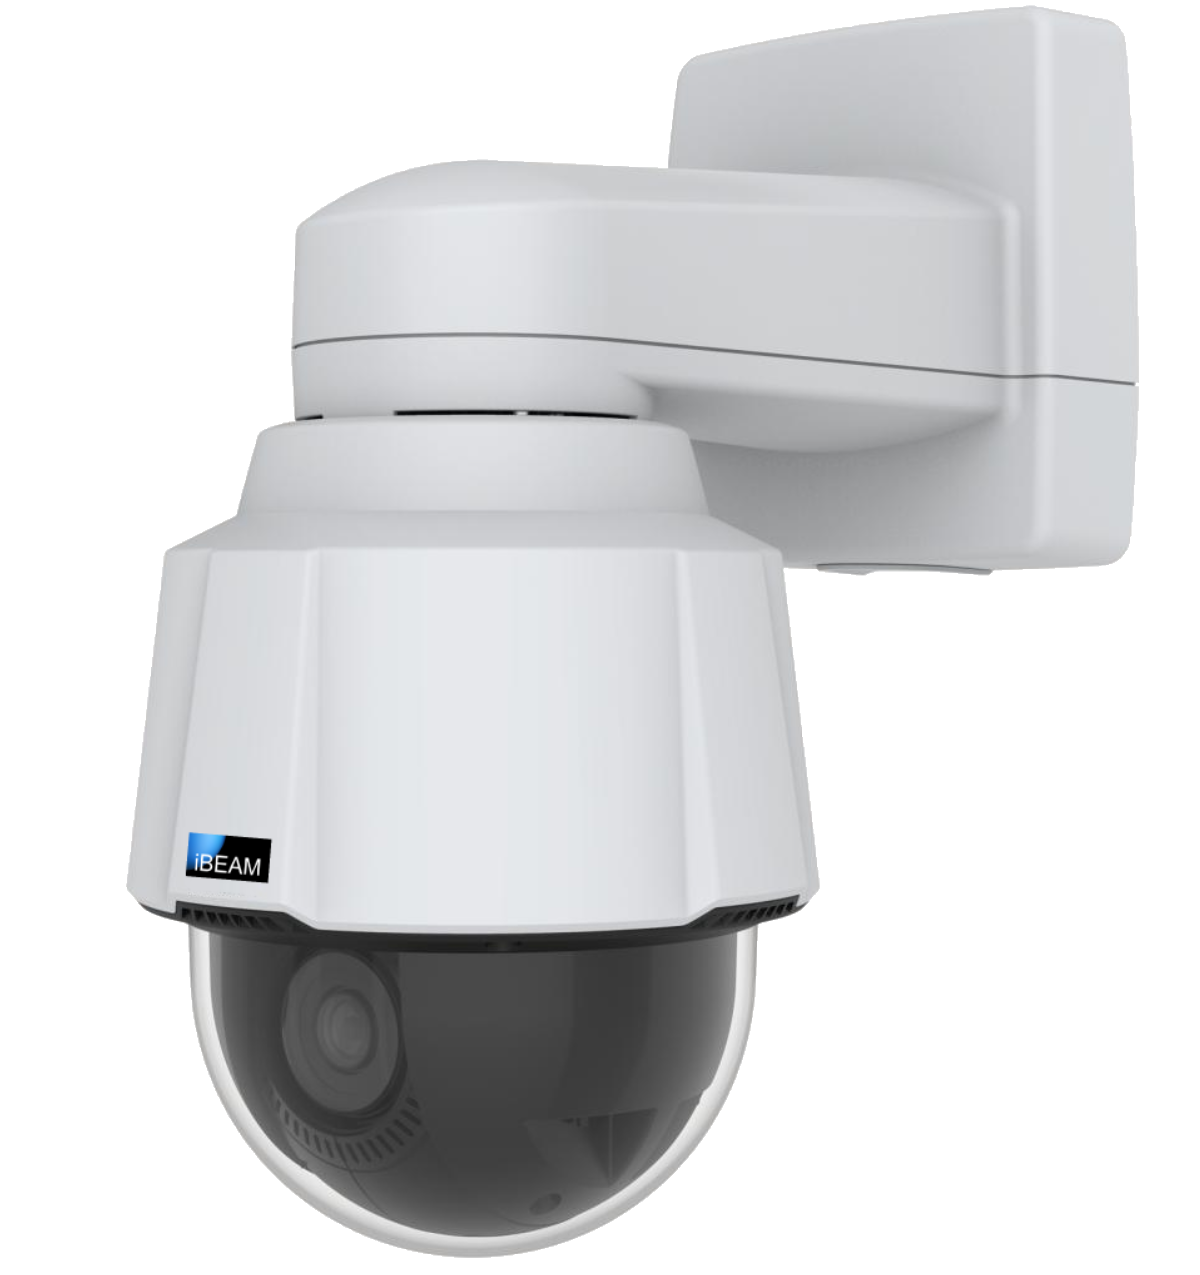 The reliable iBEAM PTZ HD Construction Camera